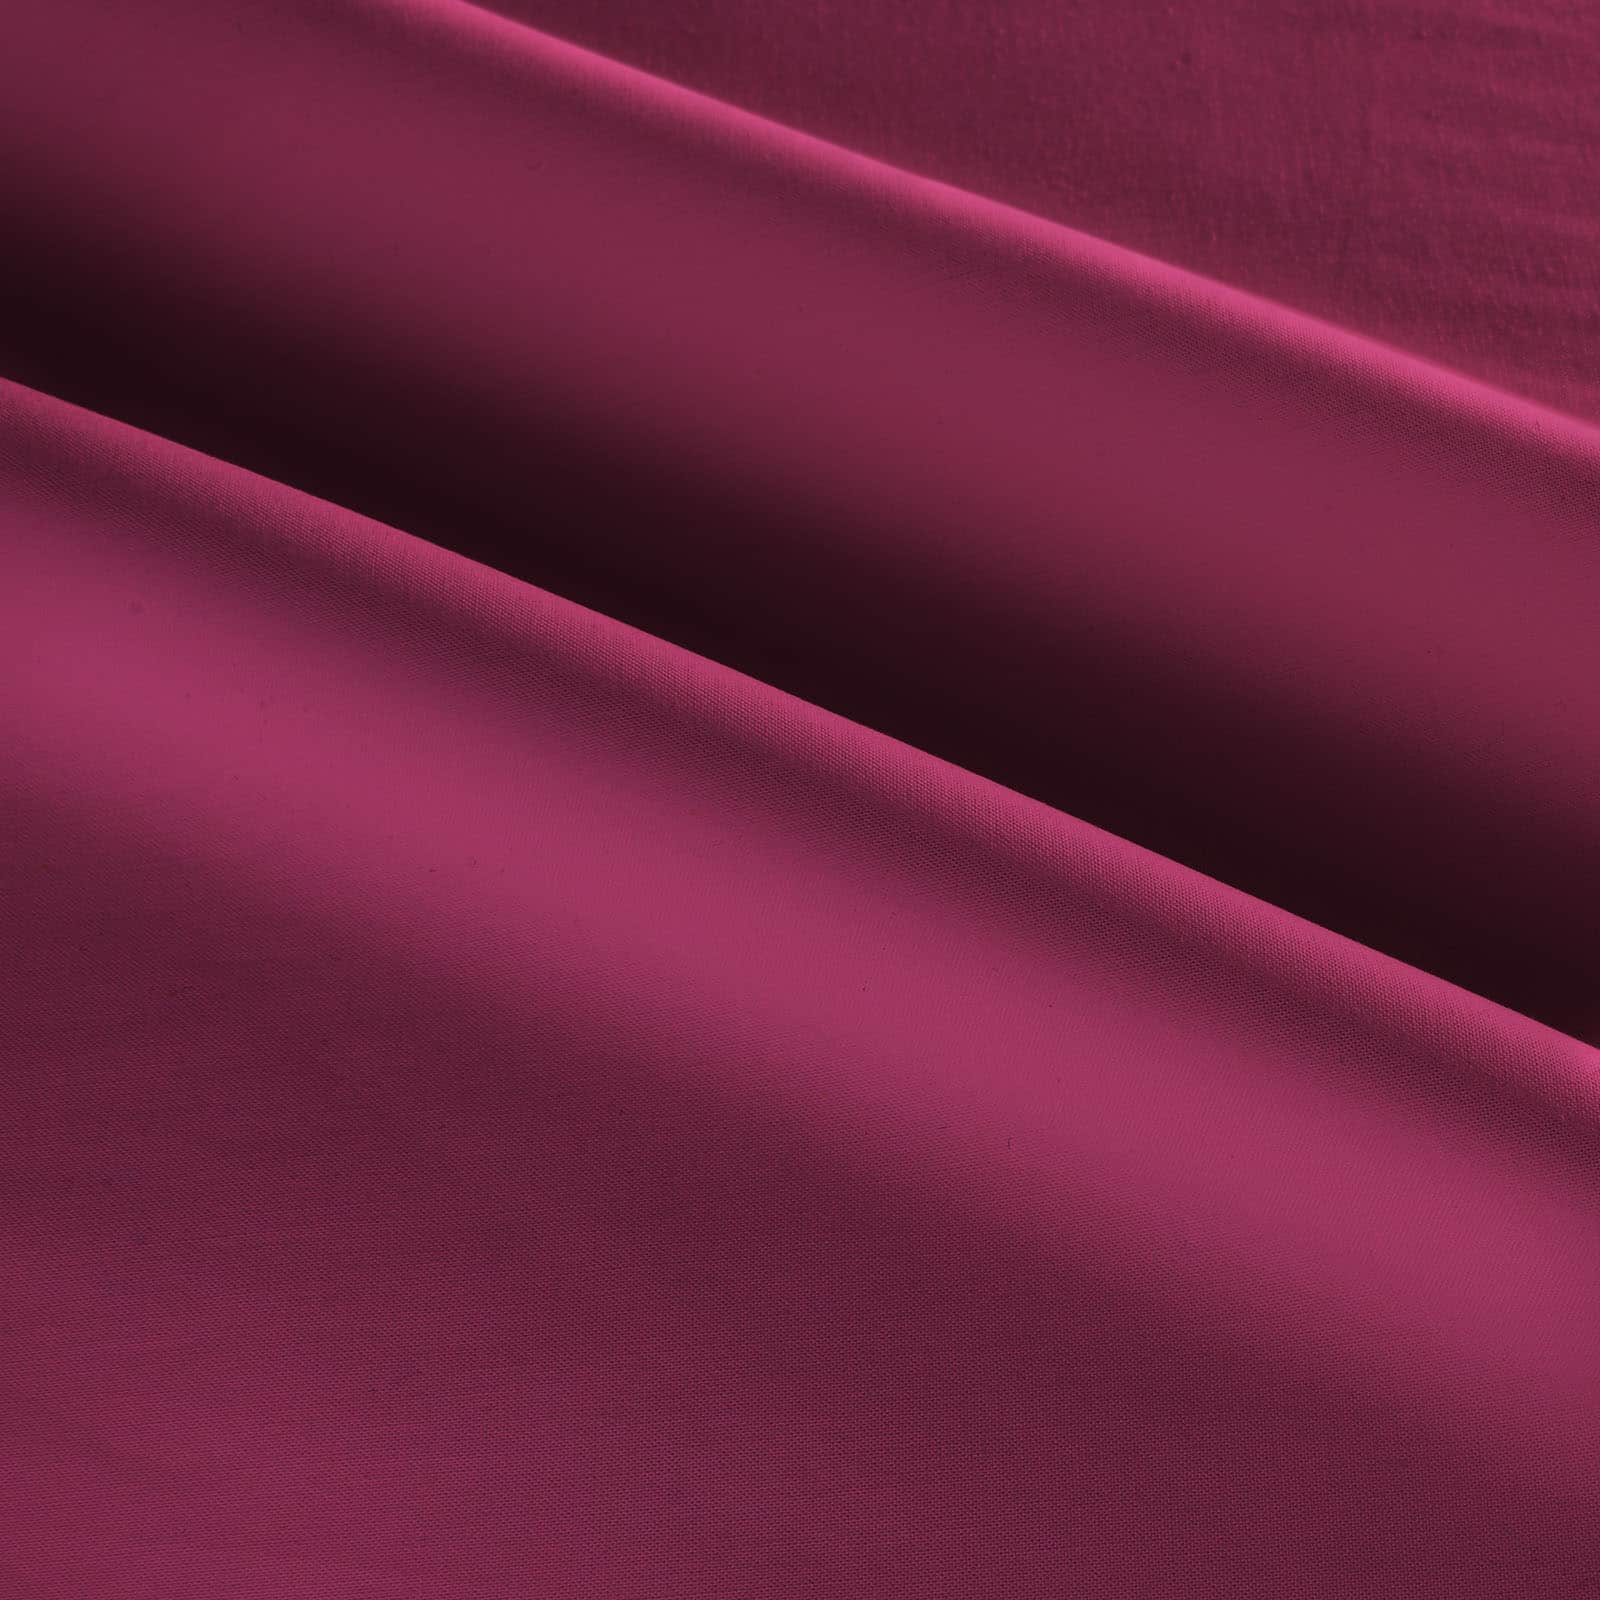 Springs Creative Burgundy Solid Cotton Fabric